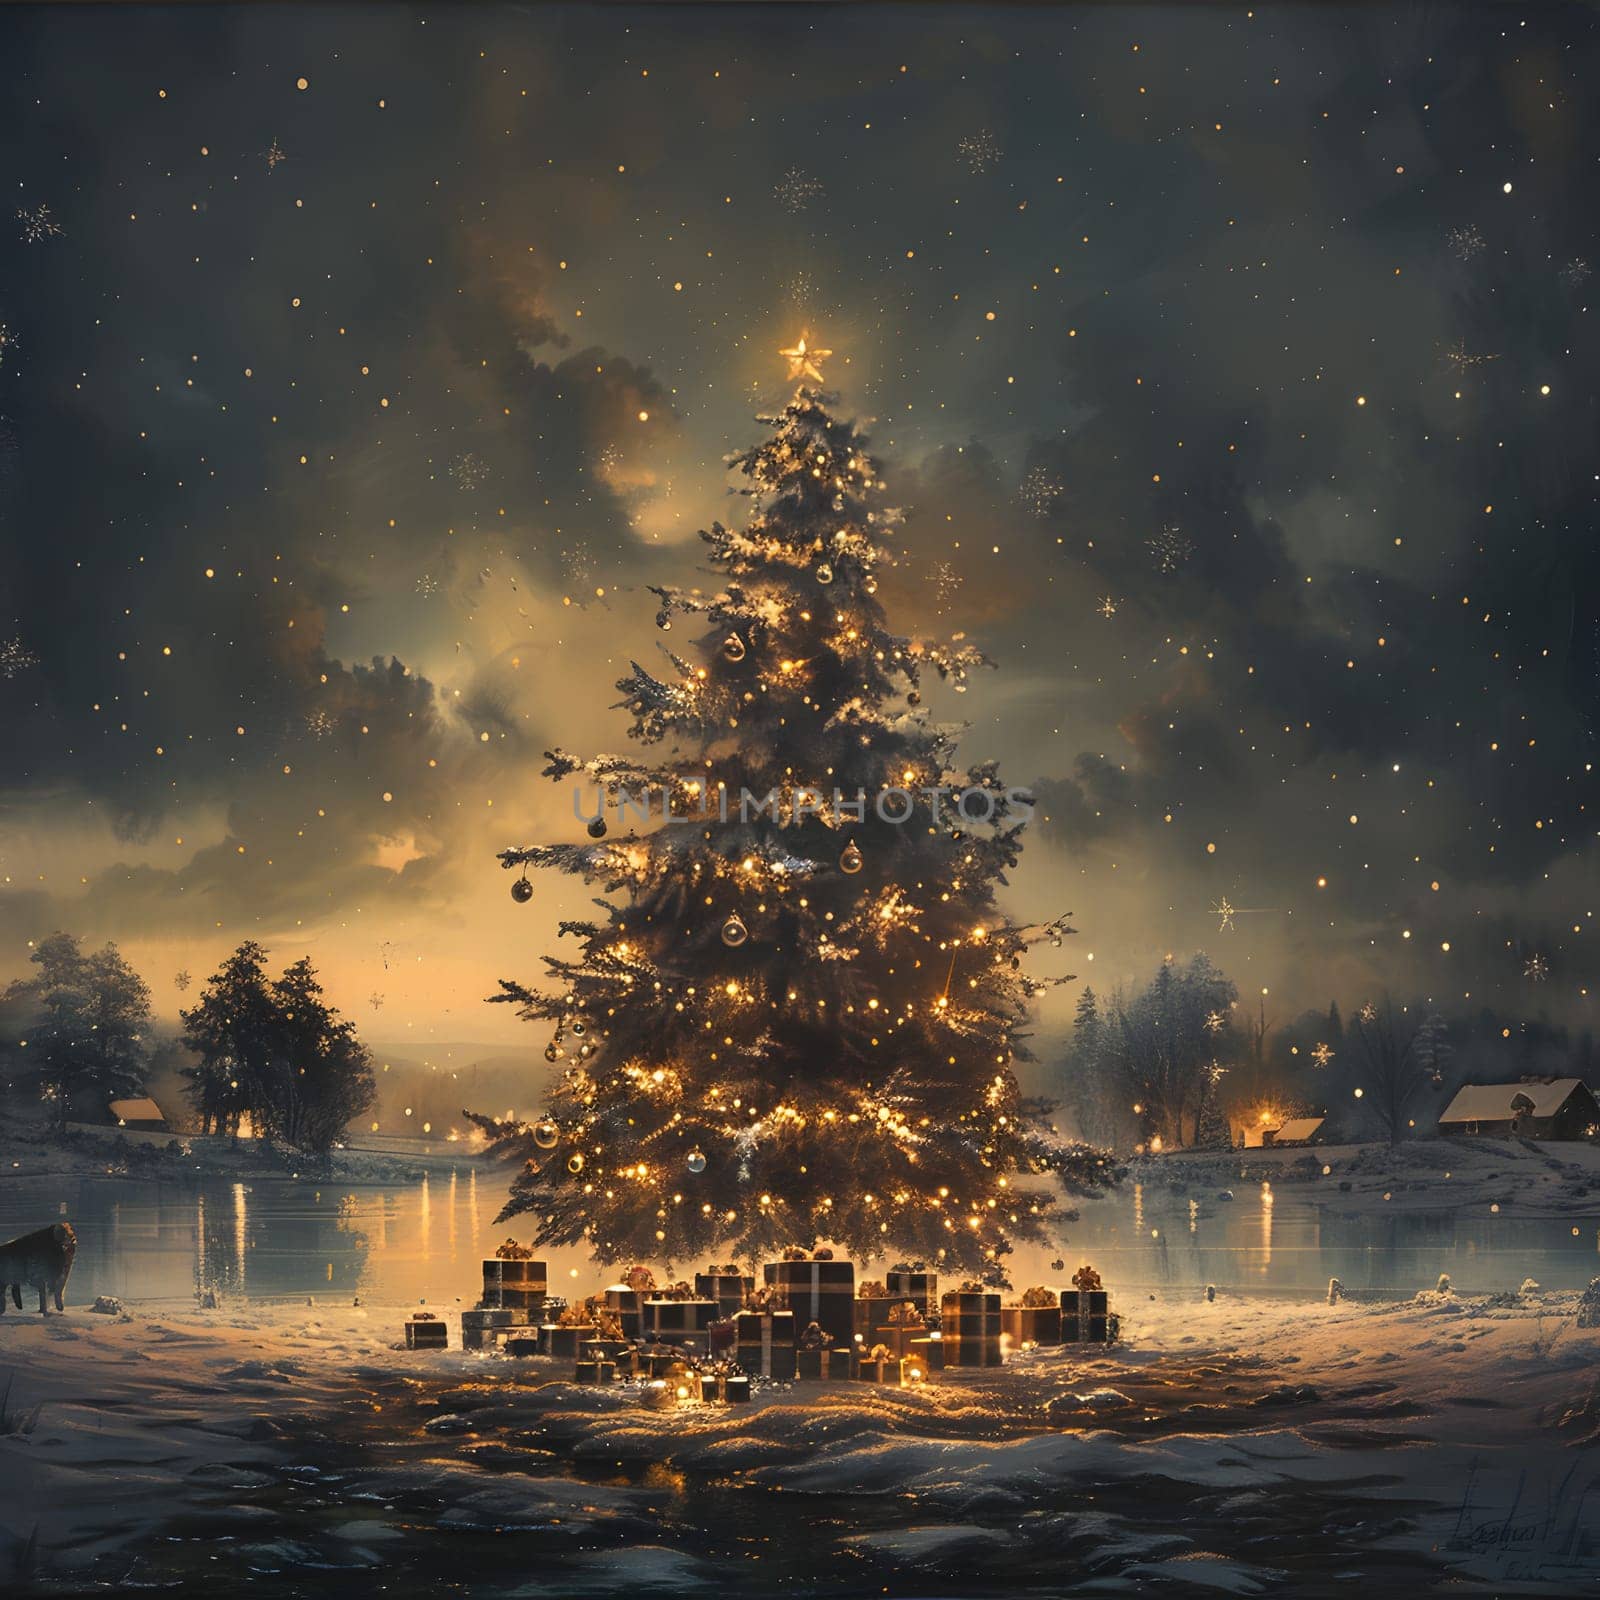 An atmospheric painting of a Christmas tree adorned with gifts underneath, set against a cloudy sky and natural landscape, showcasing the beauty of the holiday season